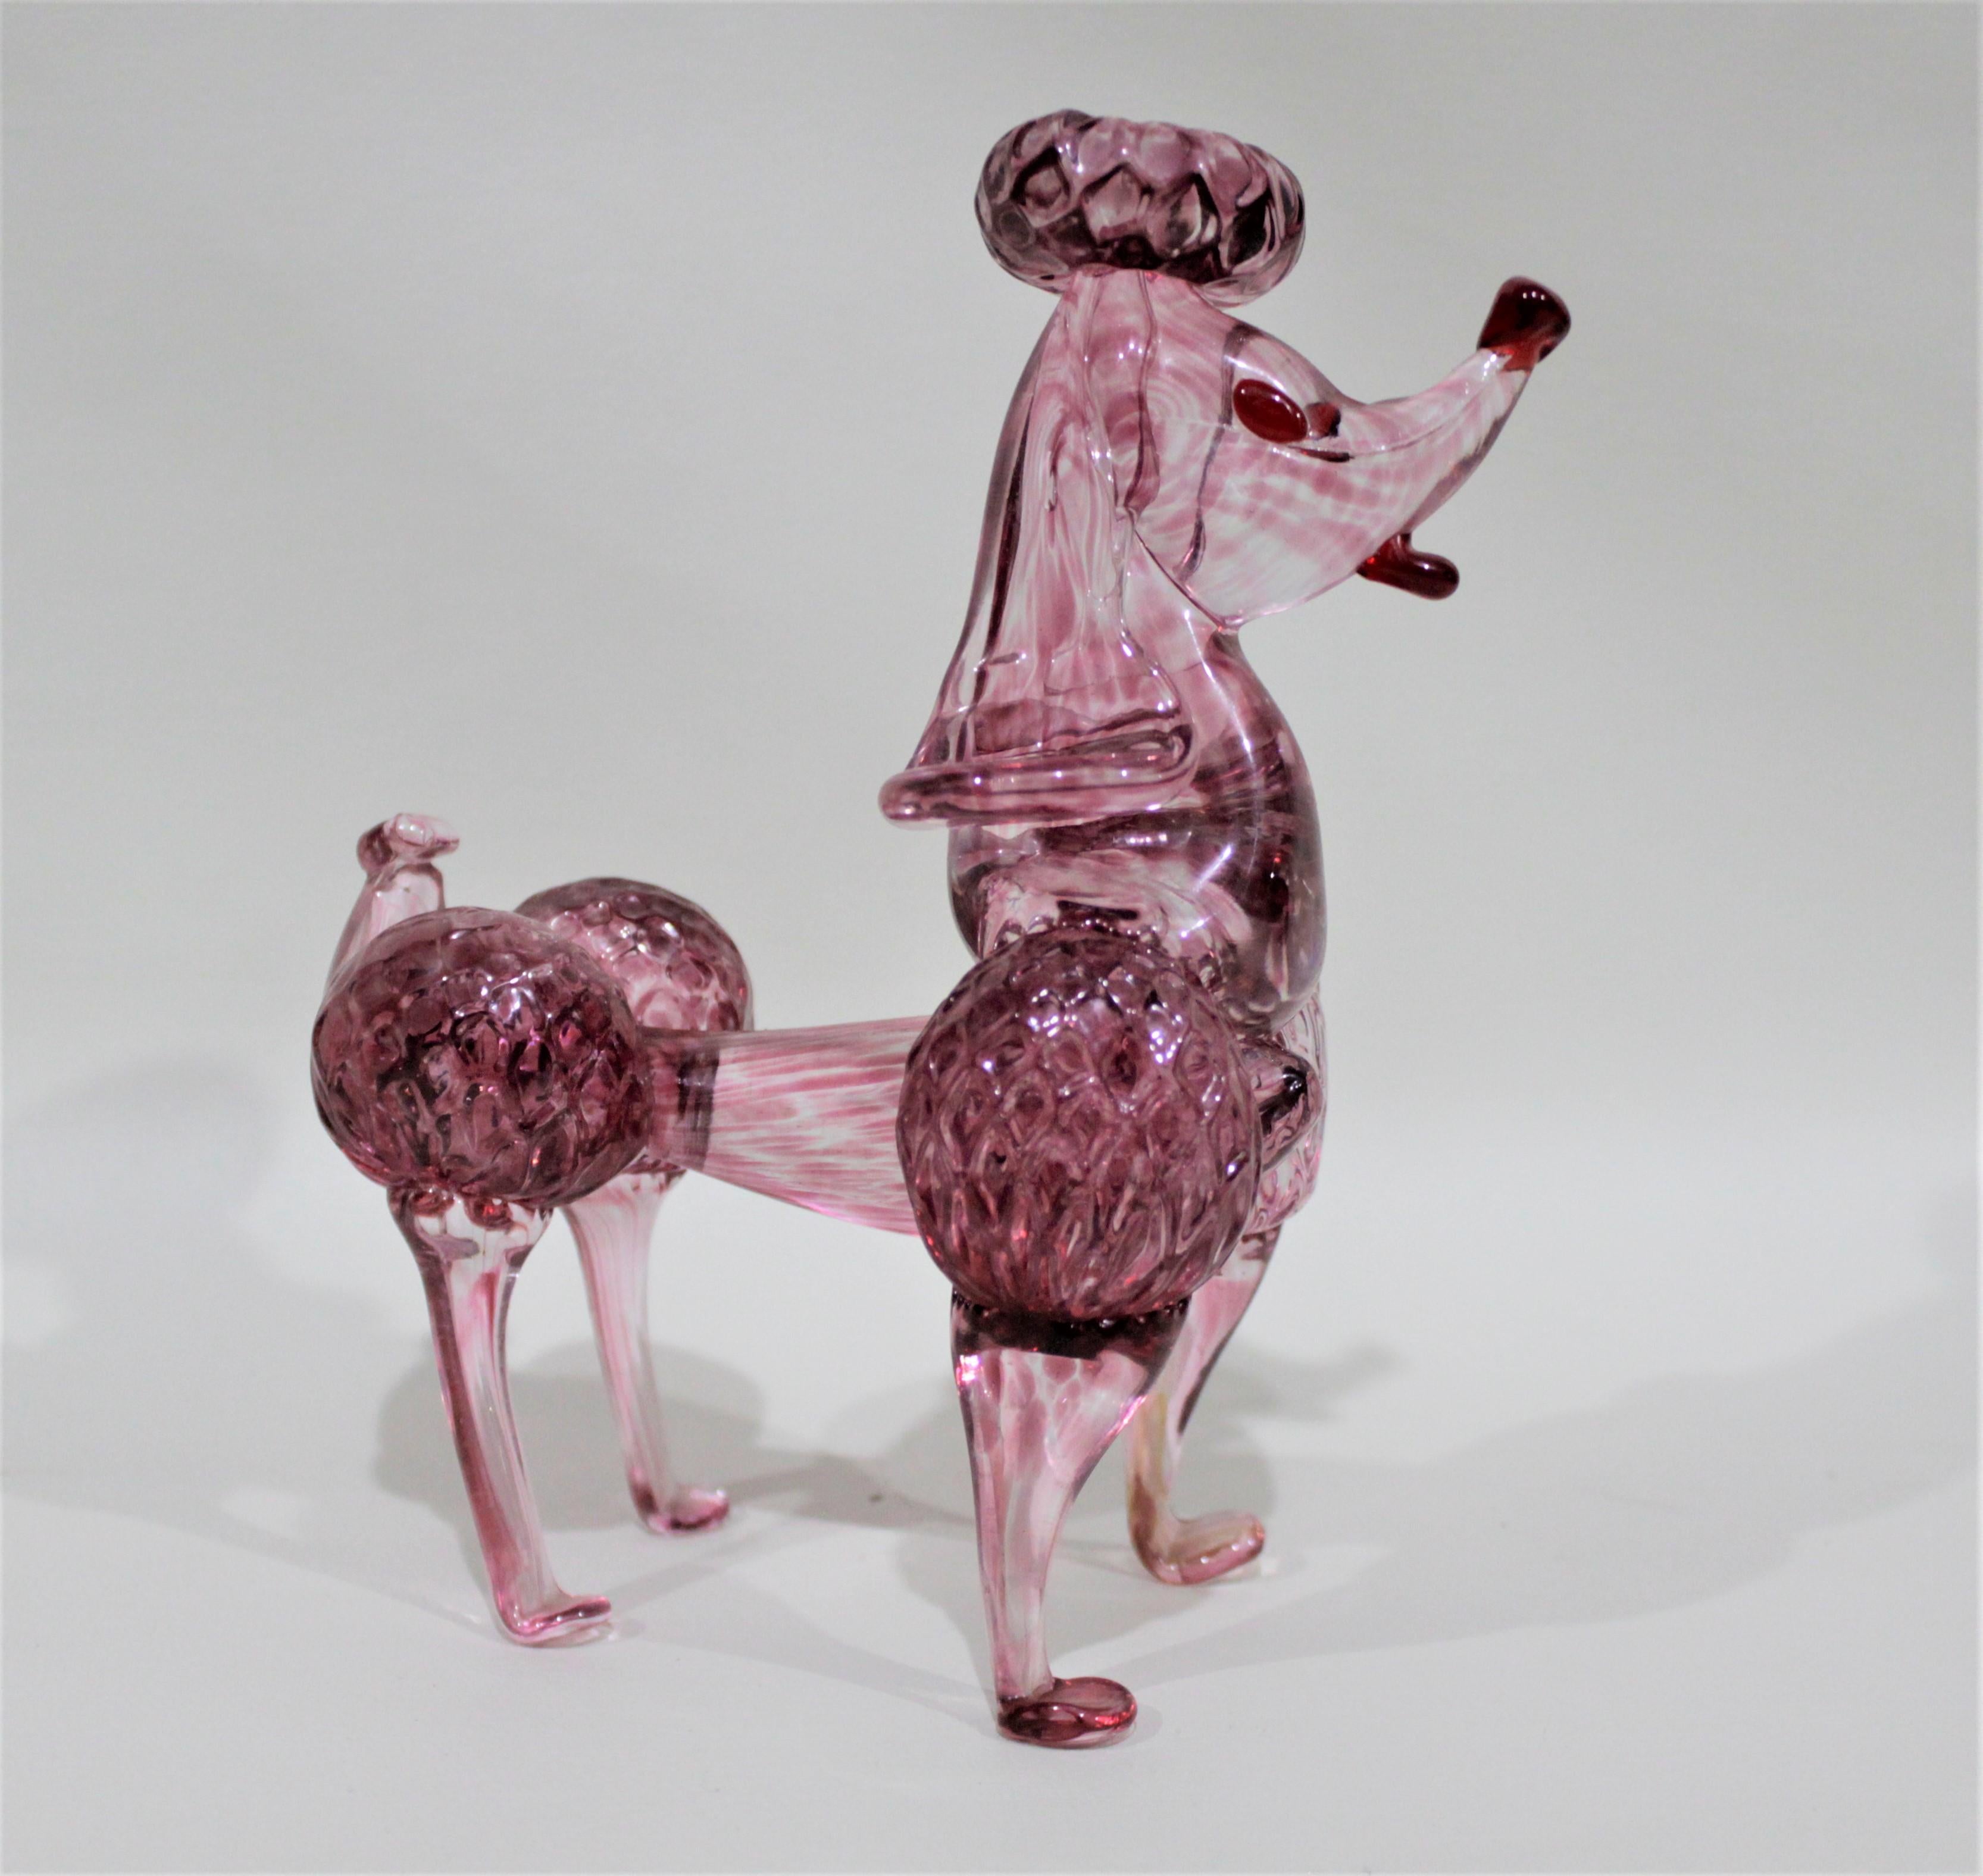 This solid pink or cranberry art glass stylized poodle figurine is unmarked, so its origins cannot be determined, but was most likely made in Italy in the Mid-Century Modern period and style. The figurine is done with a mixture of clear and